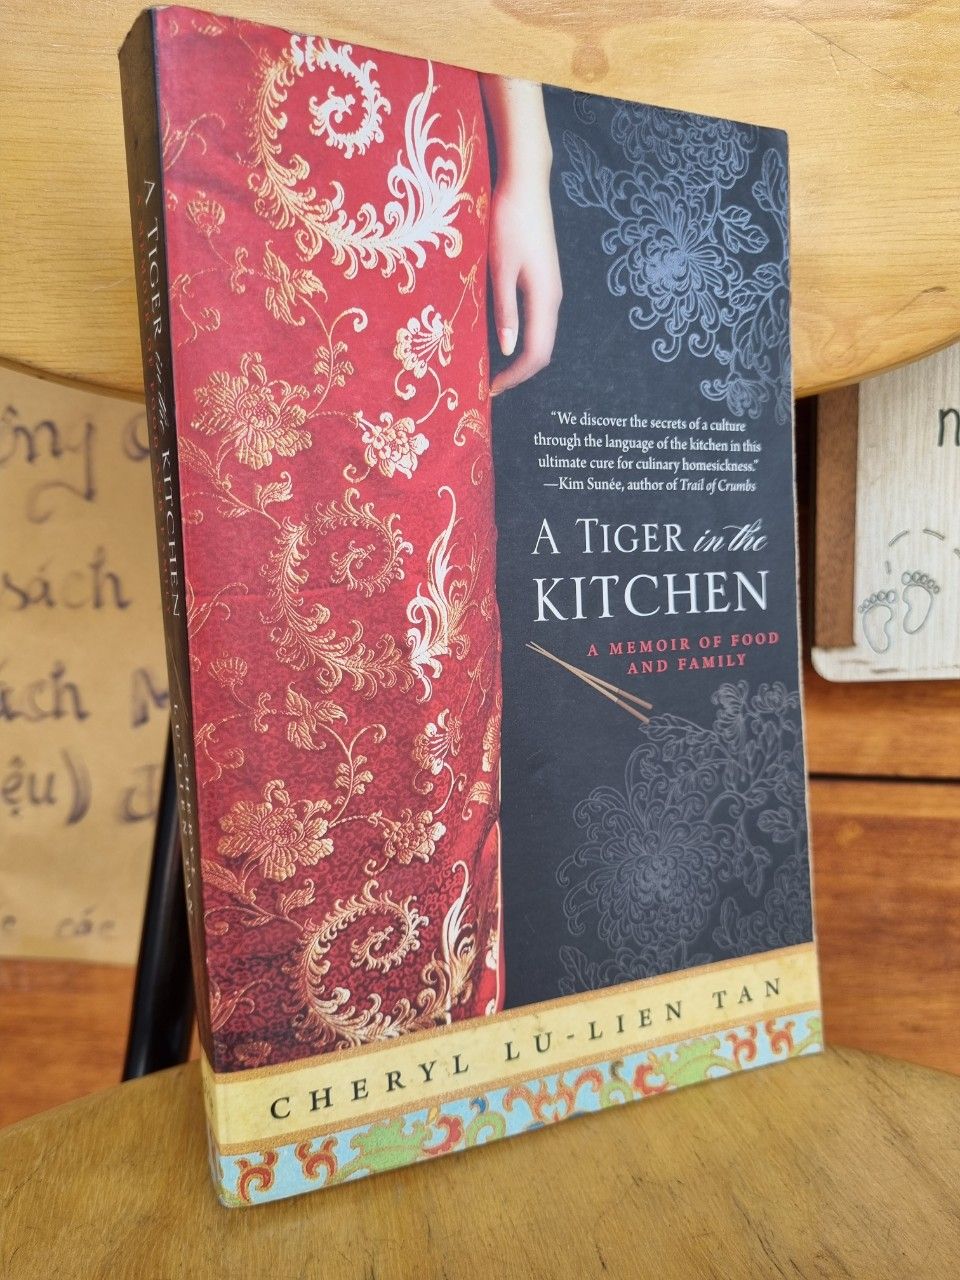  A TIGER IN THE KITCHEN : MEMOIR OF FOOD AND FAMILY - CHERYL LU-LIEN TAN 